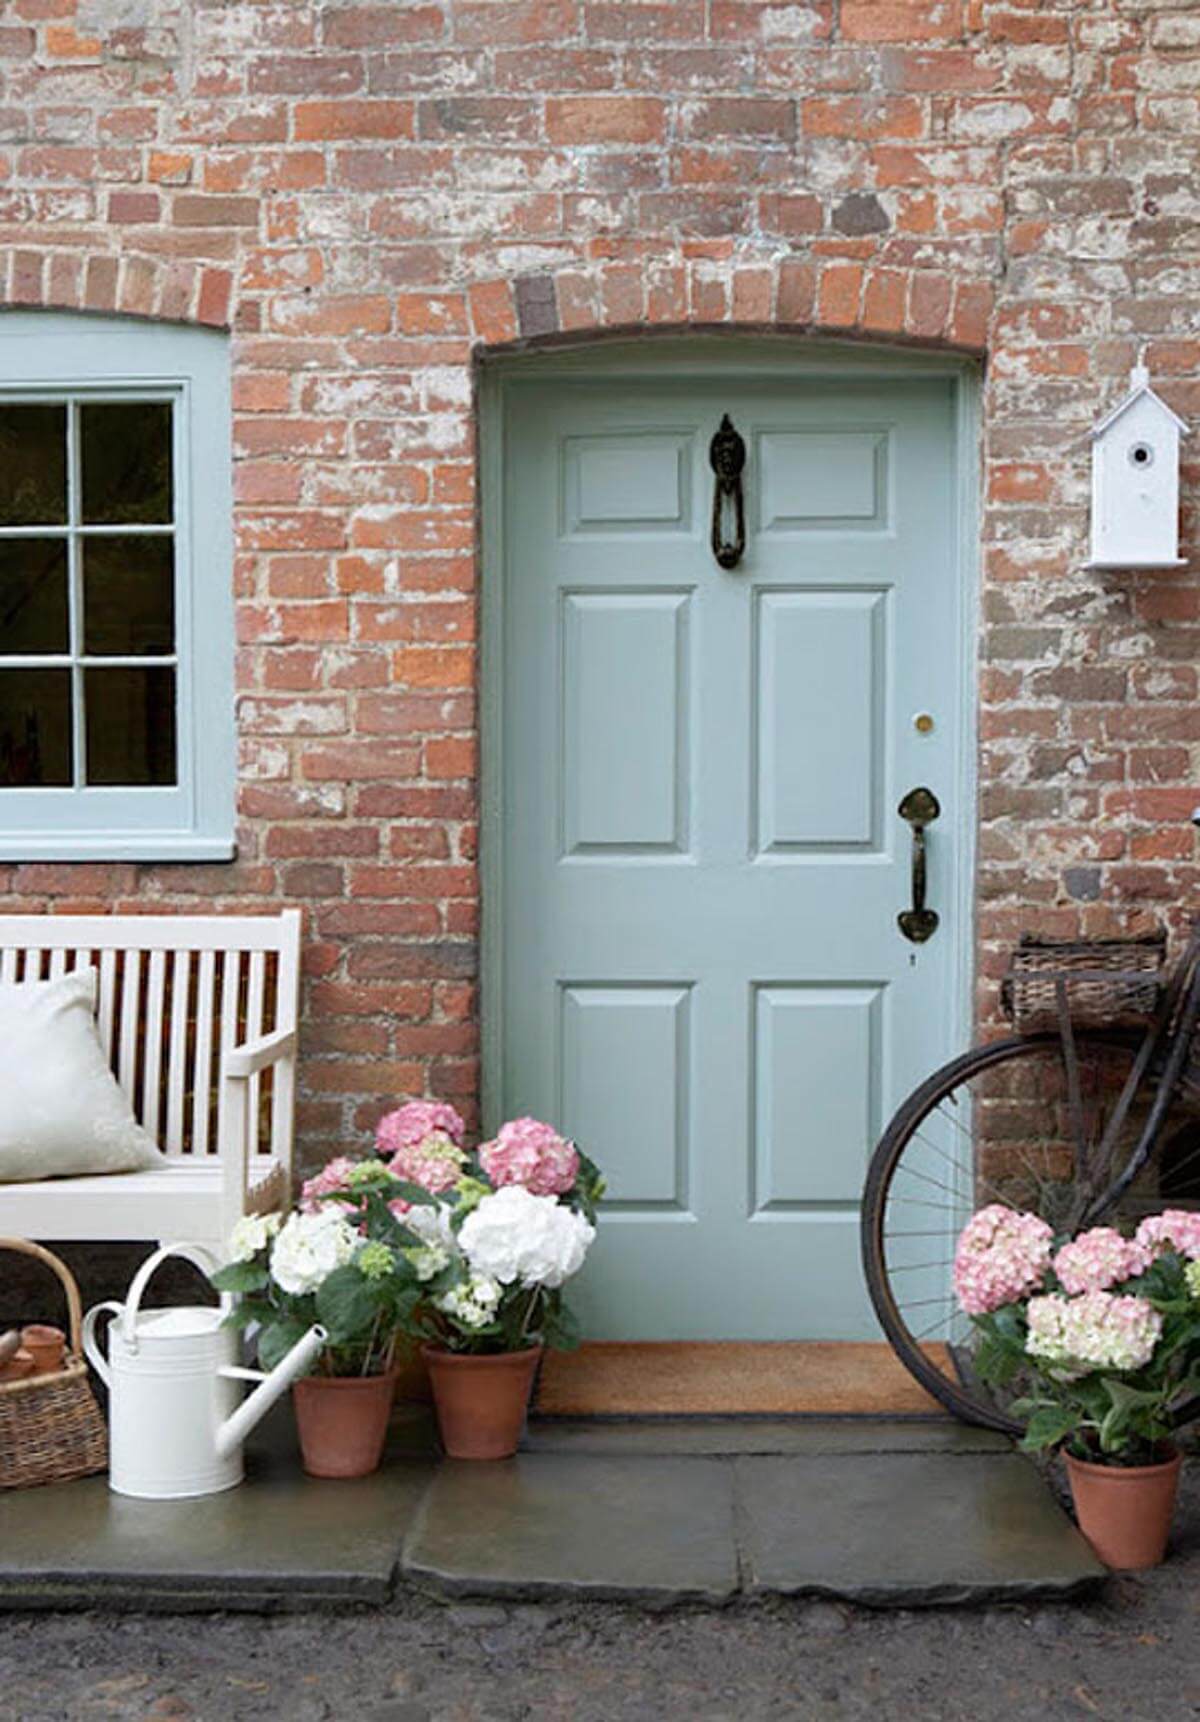 Welcome Spring: 17 Great DIY Flower Pot Ideas for Front Doors